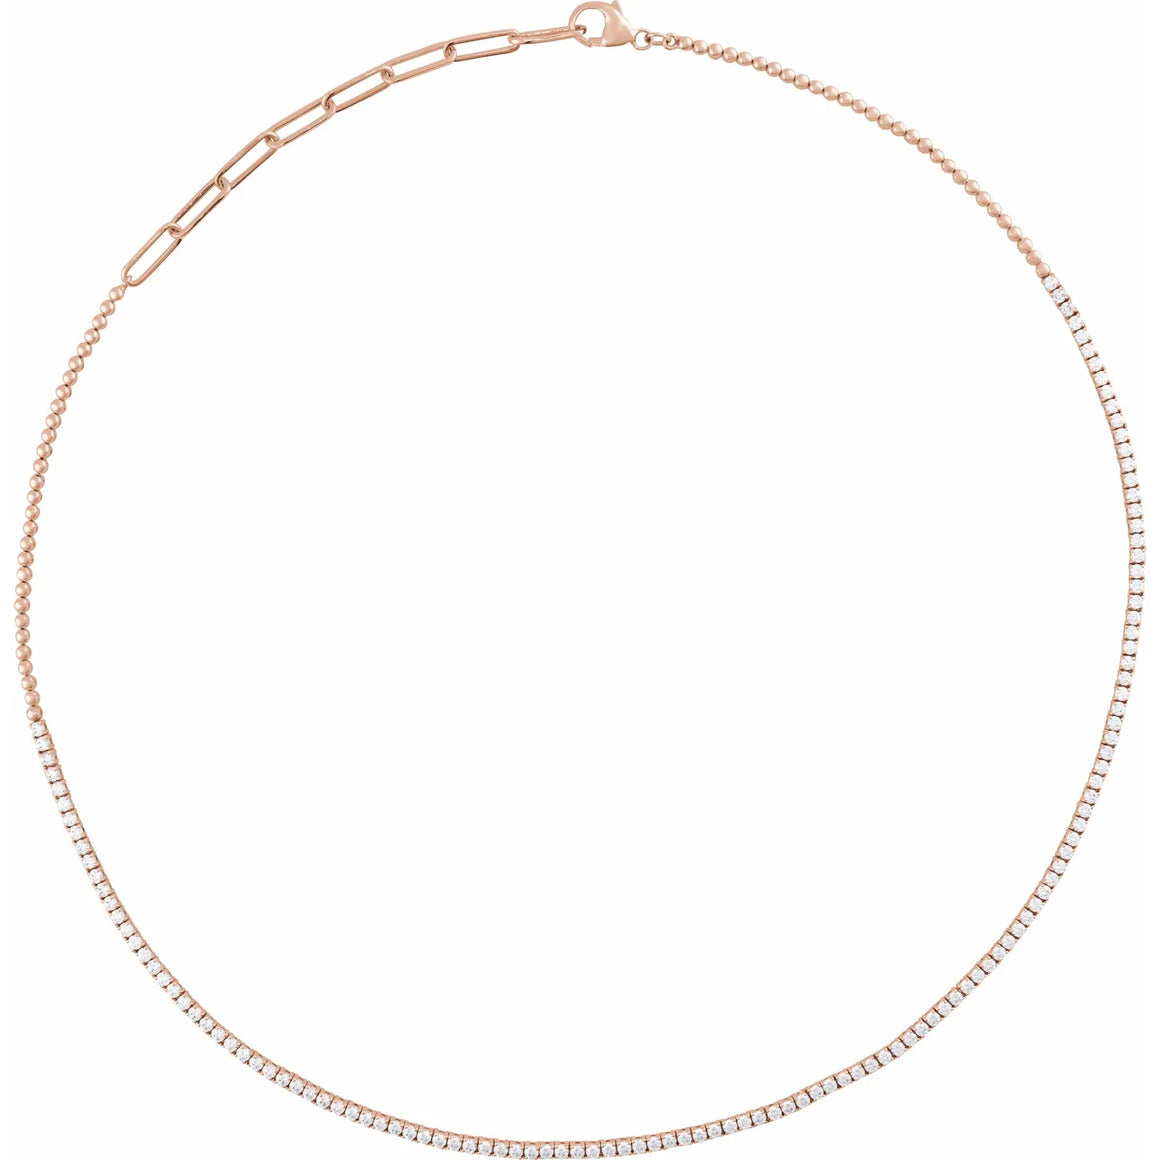 Adjustable 3 And 1/5 Carat Natural Diamond Tennis Necklace In 14K Rose Gold